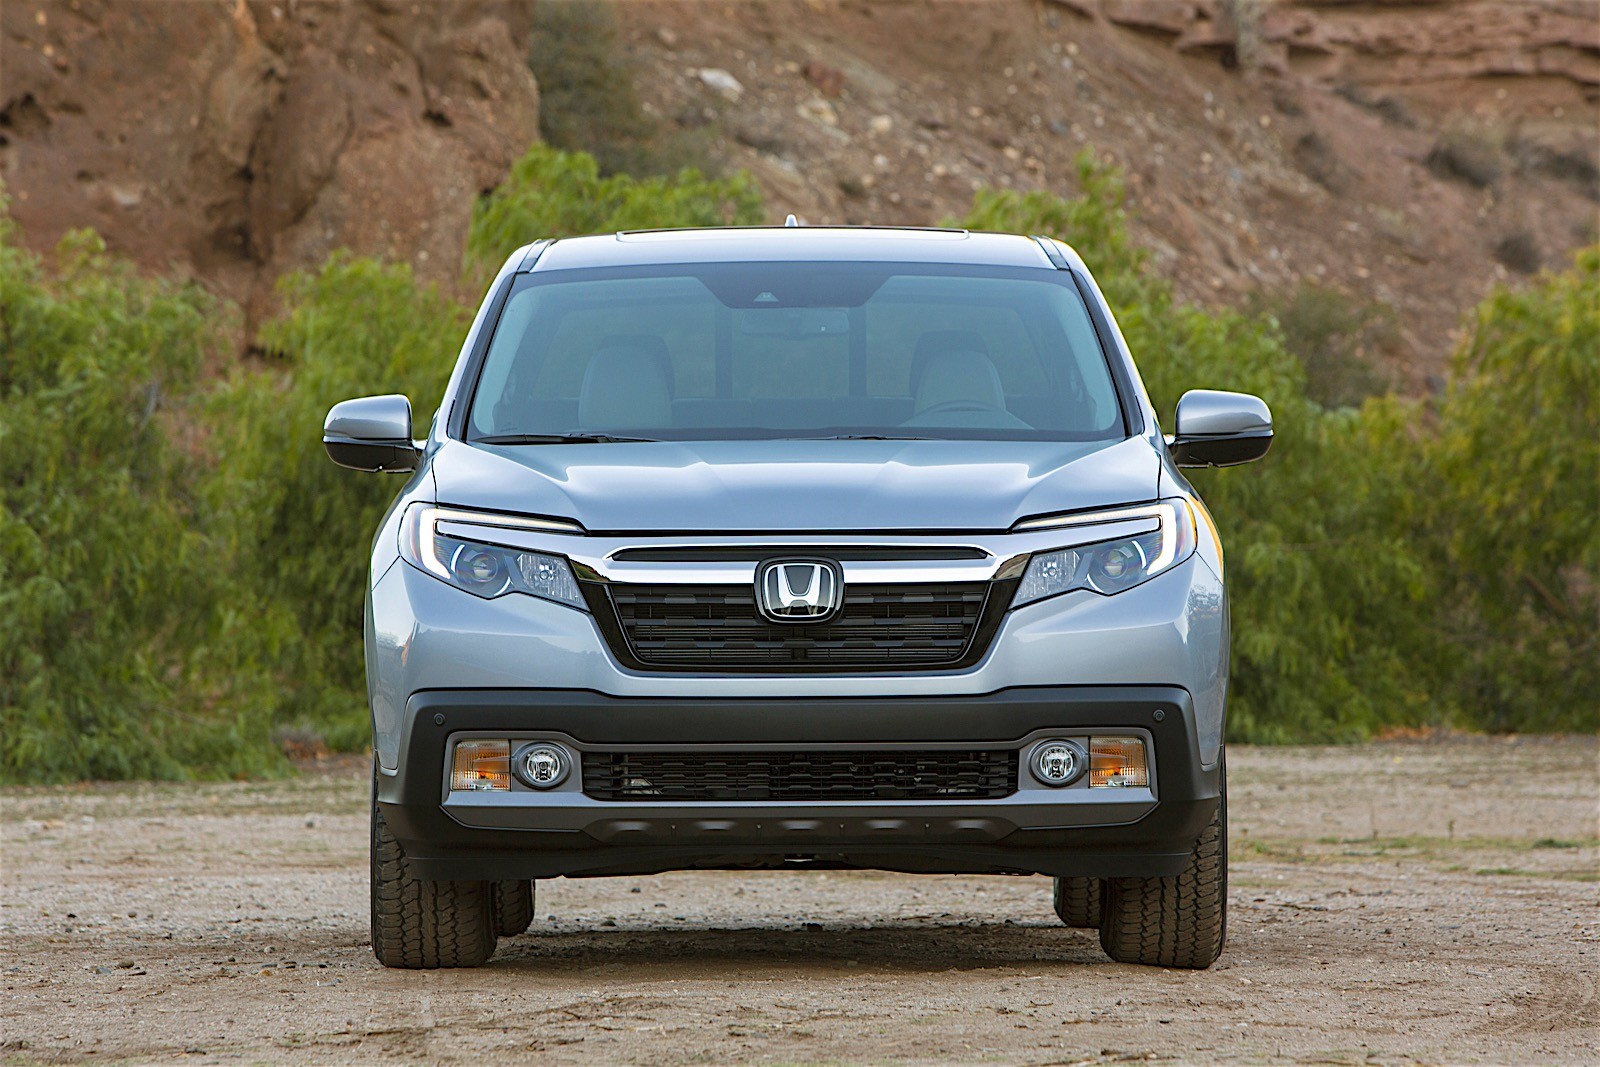 2017 Honda Ridgeline Debuts with Industry-First In-Bed ...